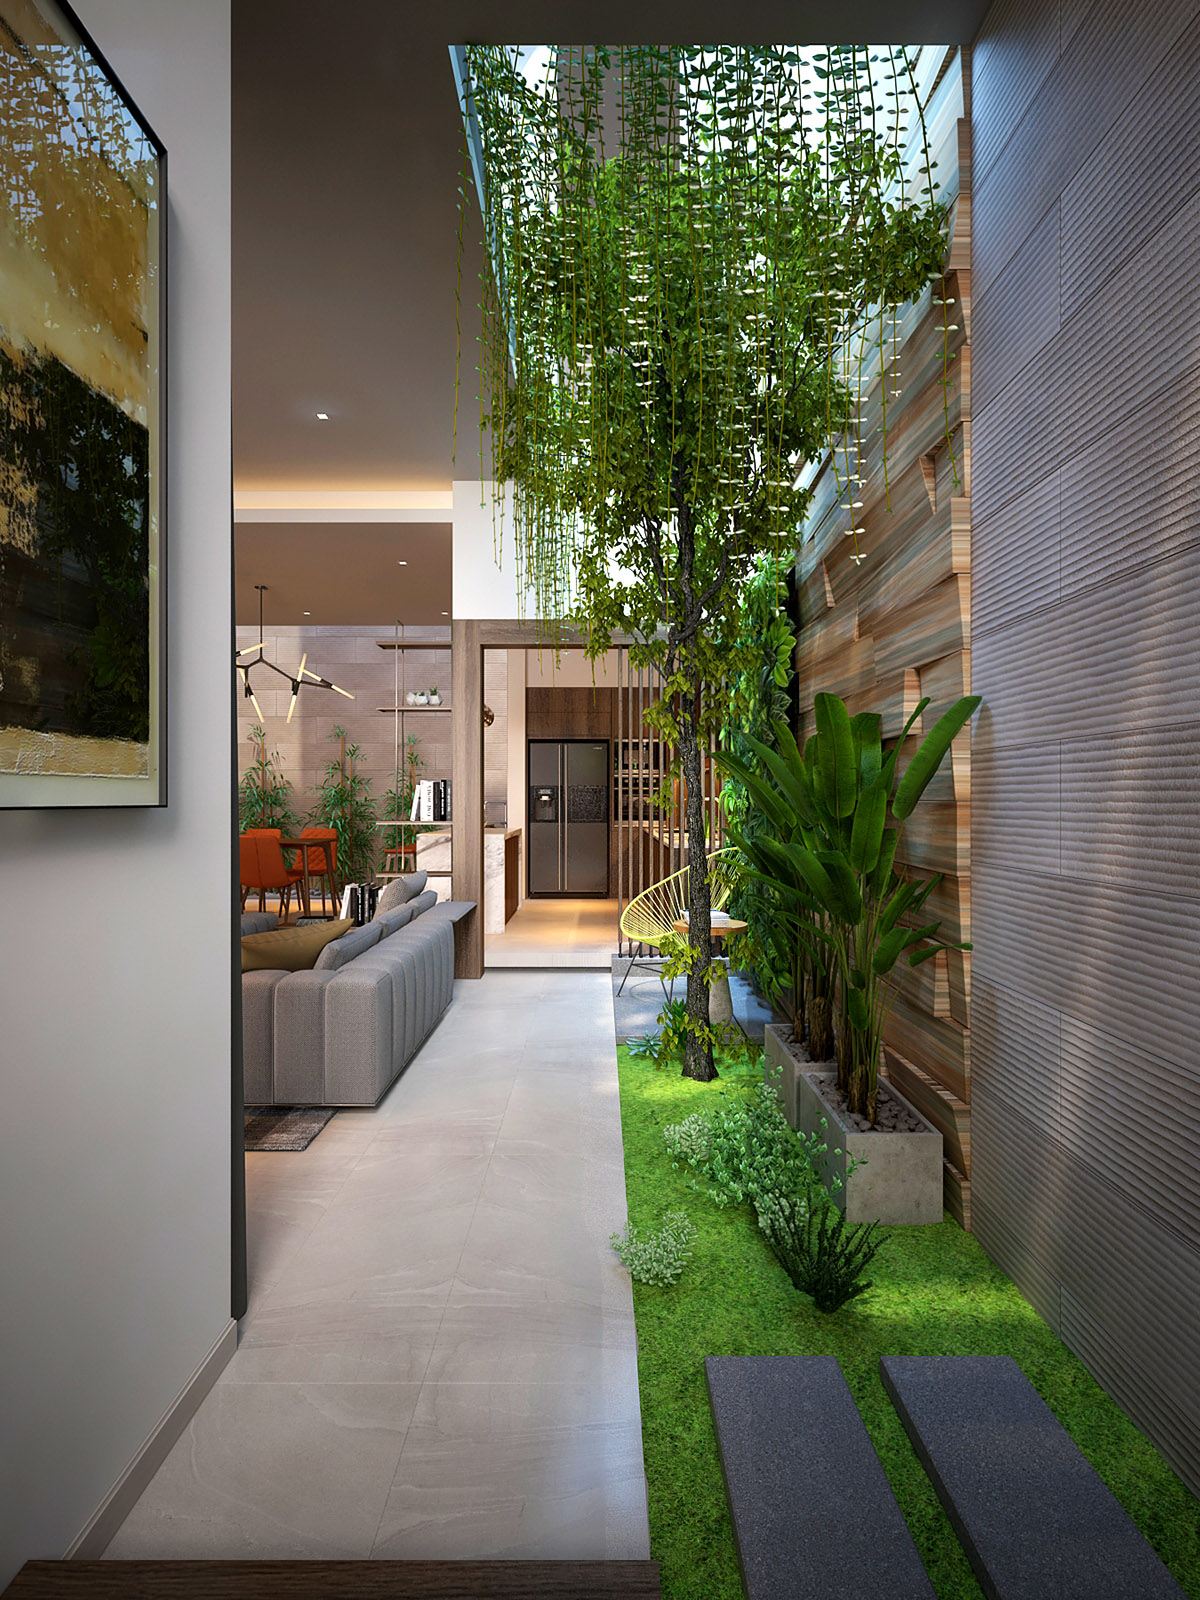 inside green indoor spaces courtyard homes small gardens garden courtyards room designing terrariums feature beautiful house interior living outdoor natural